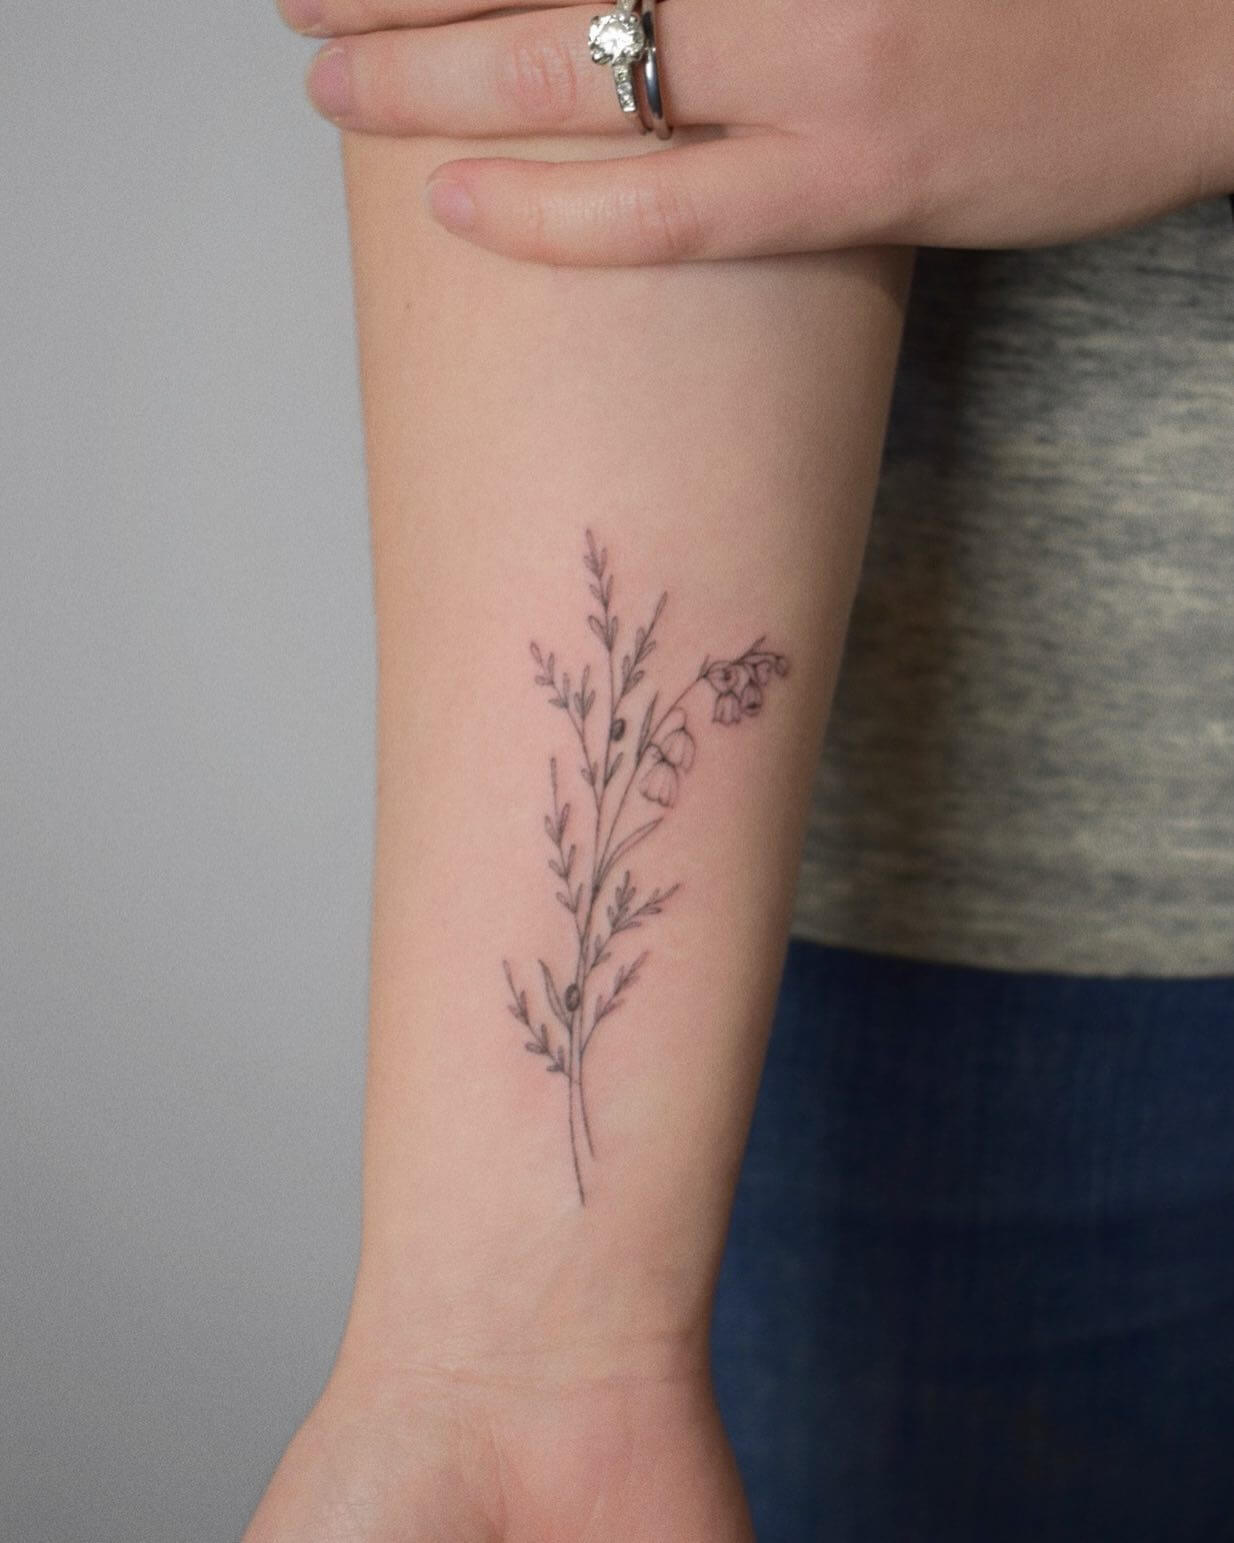 Lily of the valley tattoo located on the inner forearm